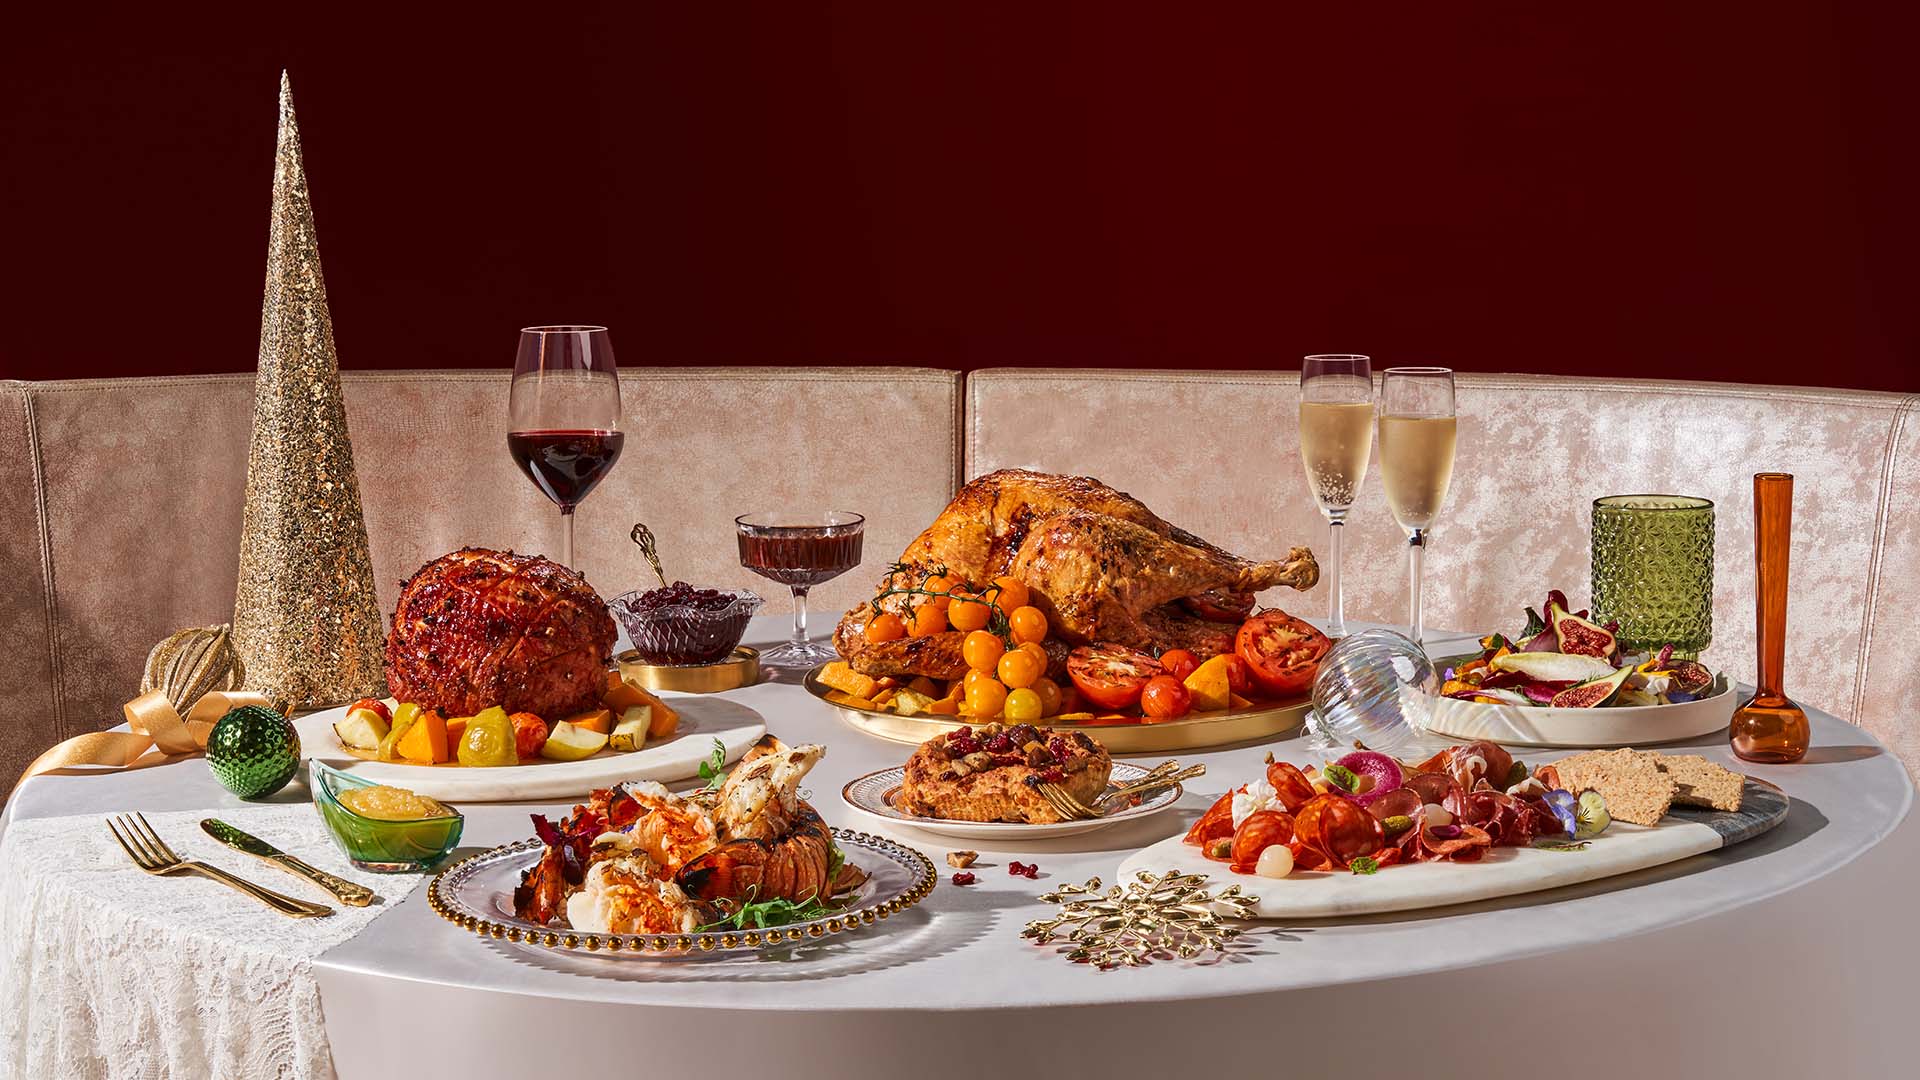 a holiday feast, glasses of wine and decor arranged on a table with a tablecloth